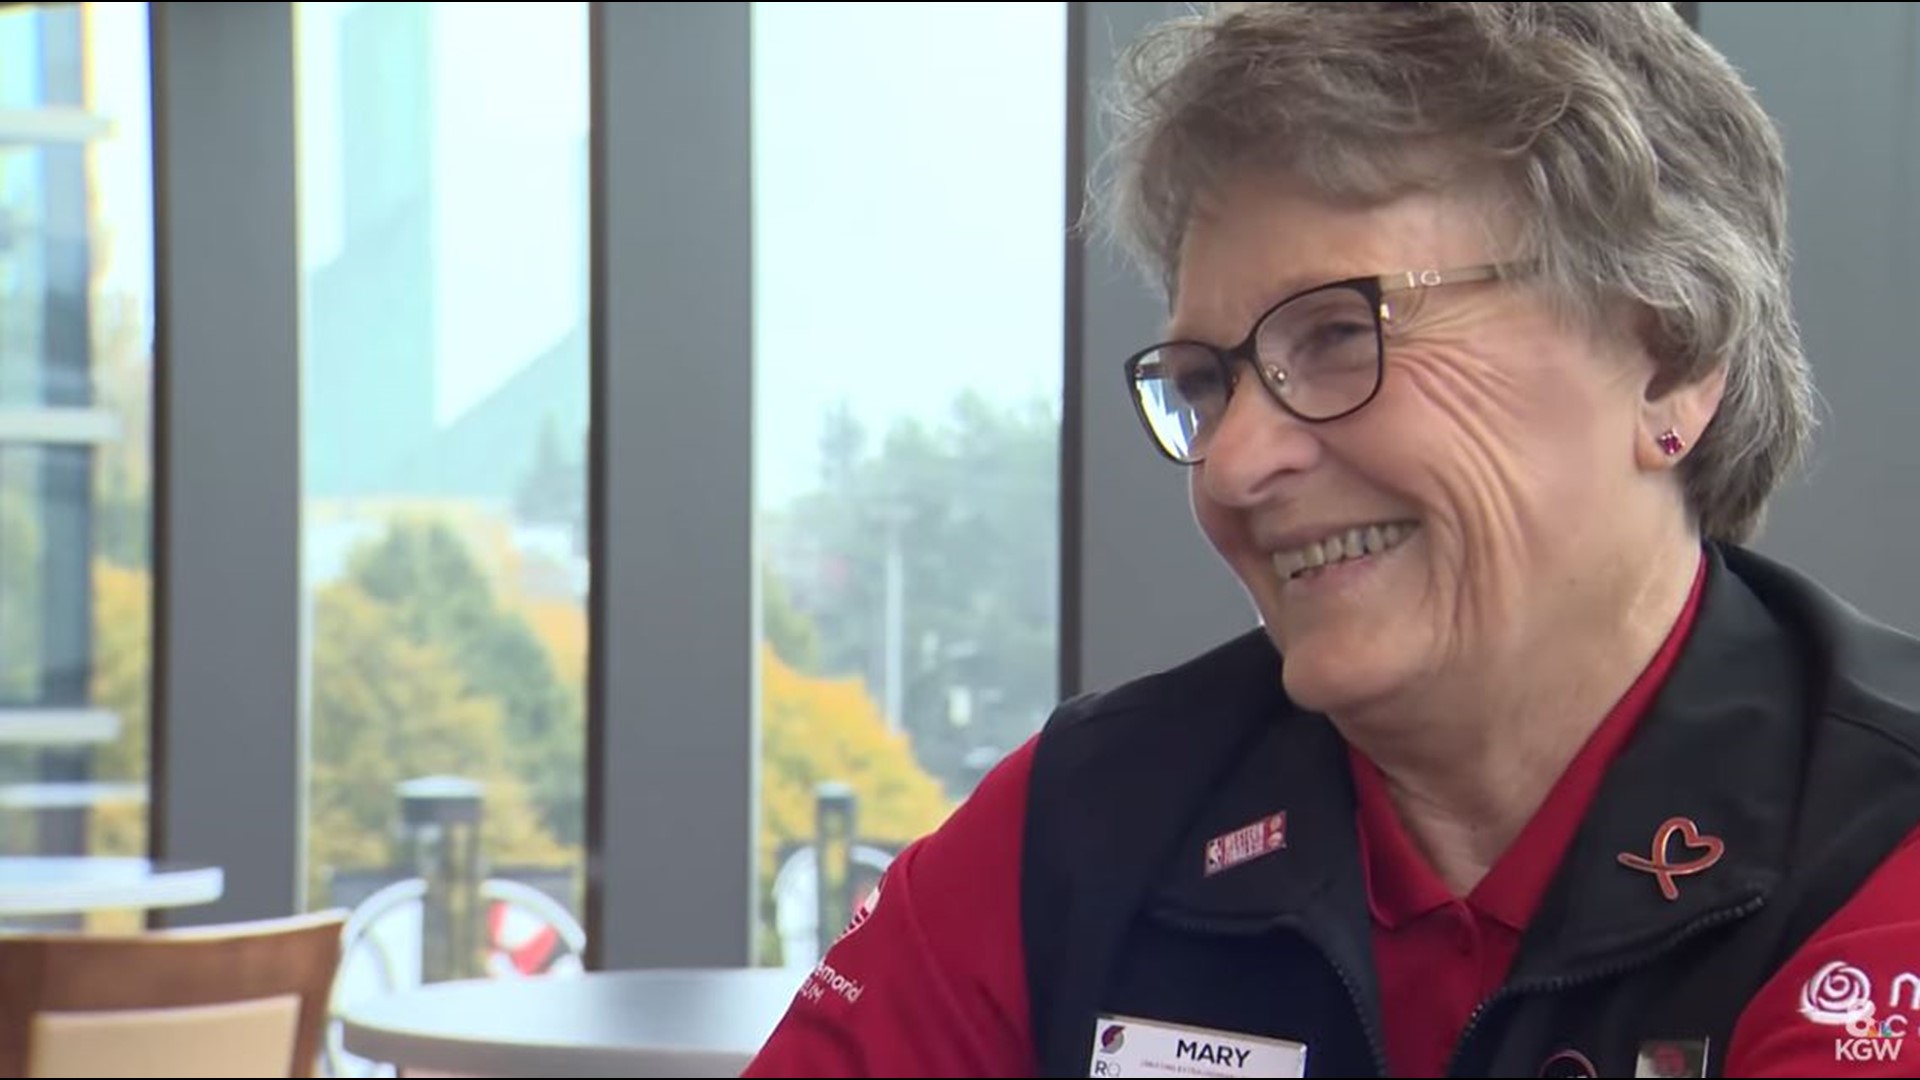 For 16 years, Vancouver grandmother Mary Ricks has rubbed elbows with celebs and made friends with Blazers legends, with no plans to retire.